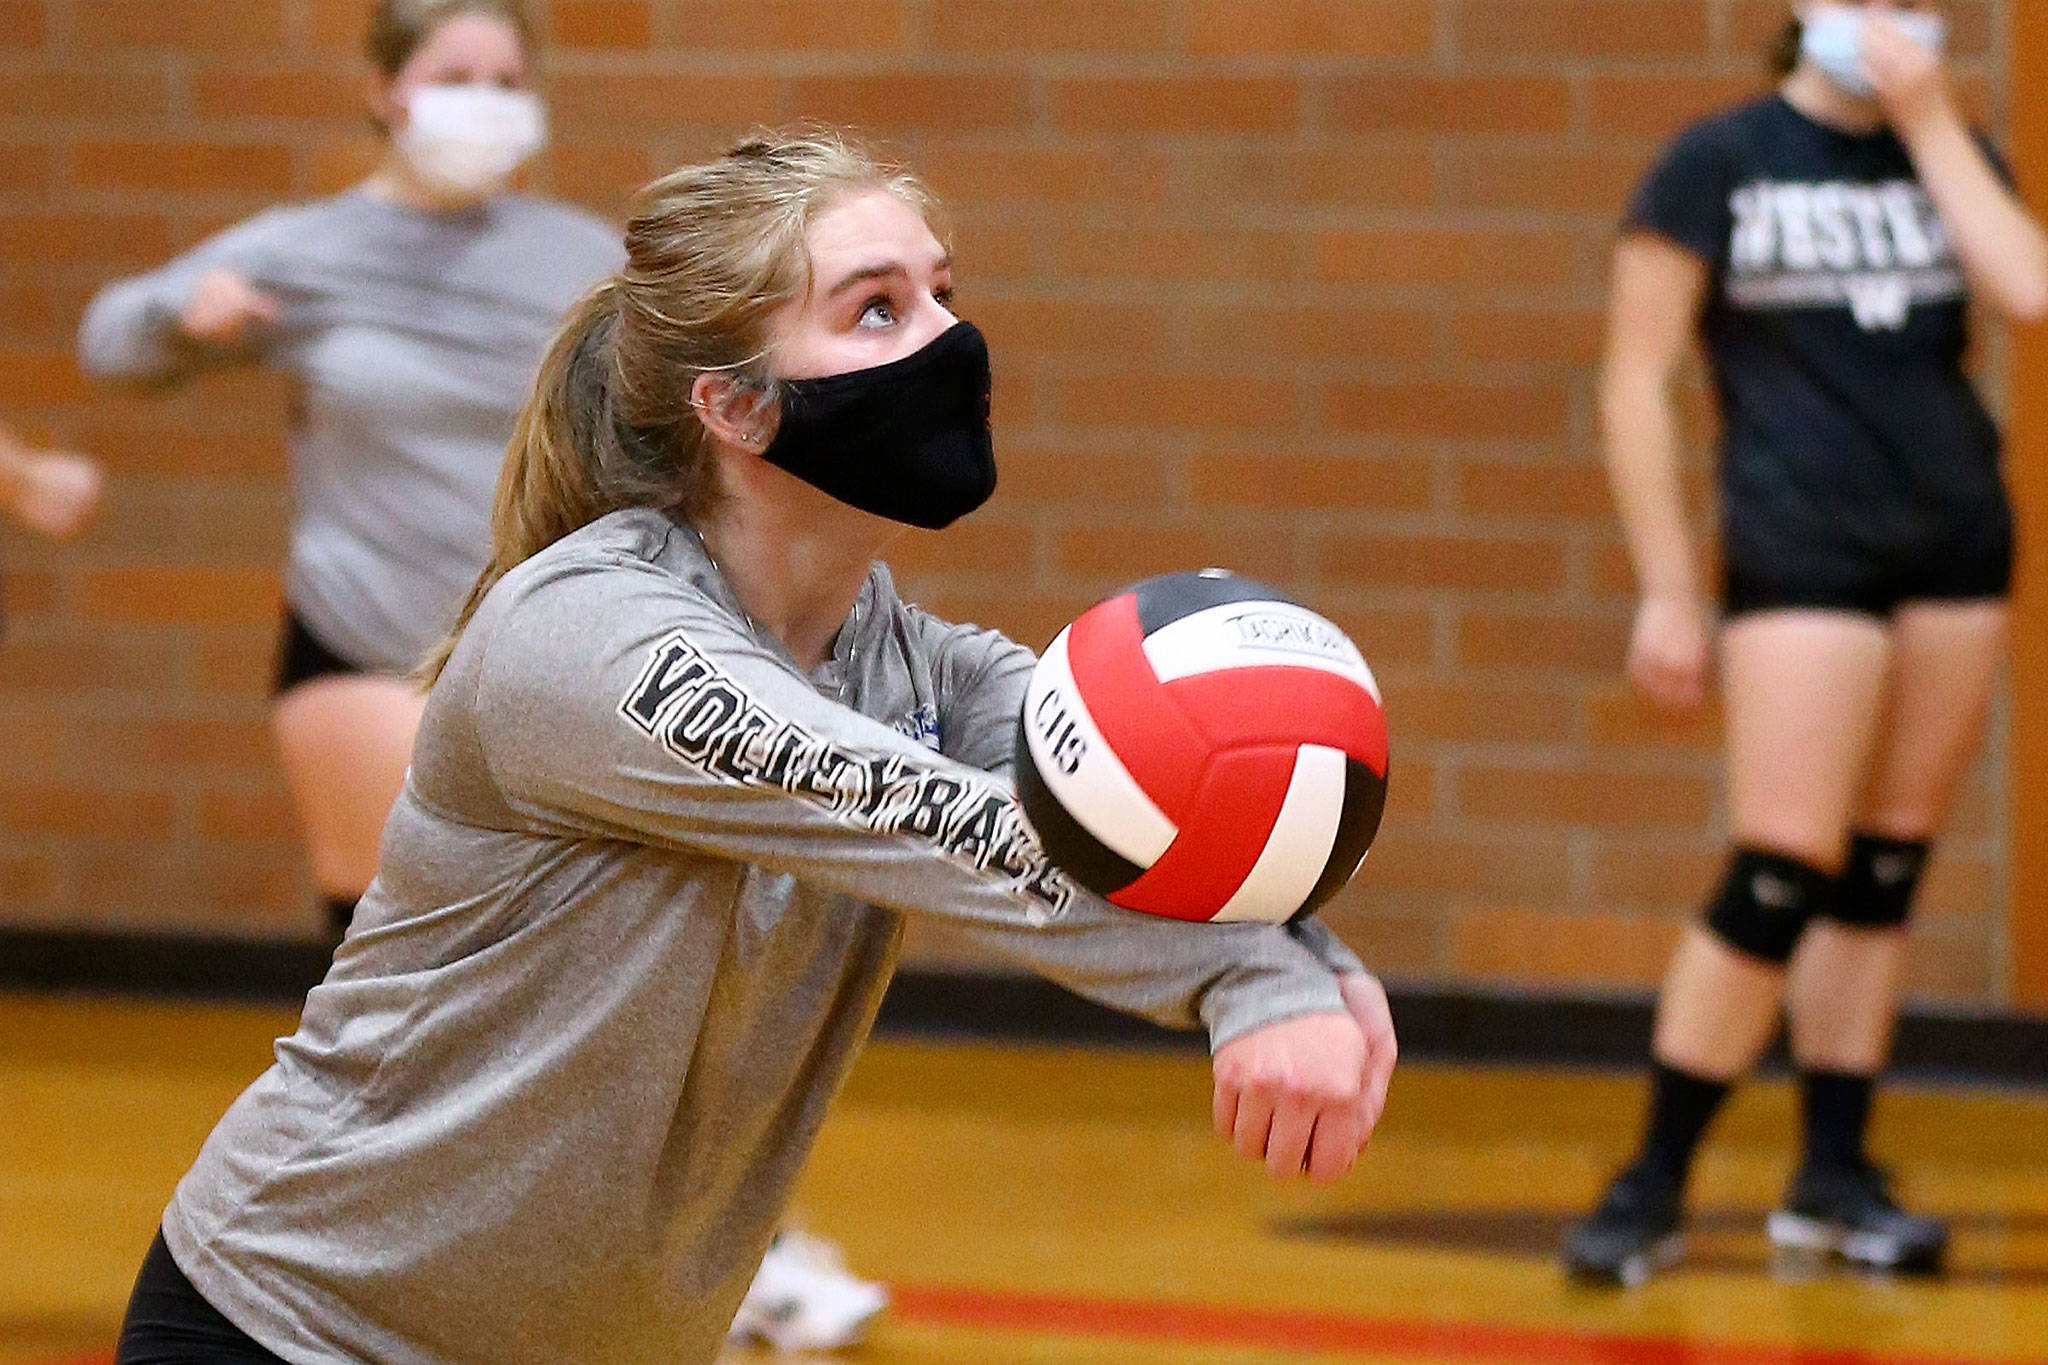 Coupeville High School’s Jordyn Rogers passes during a volleyball drill Tuesday. (Photo by John Fisken)